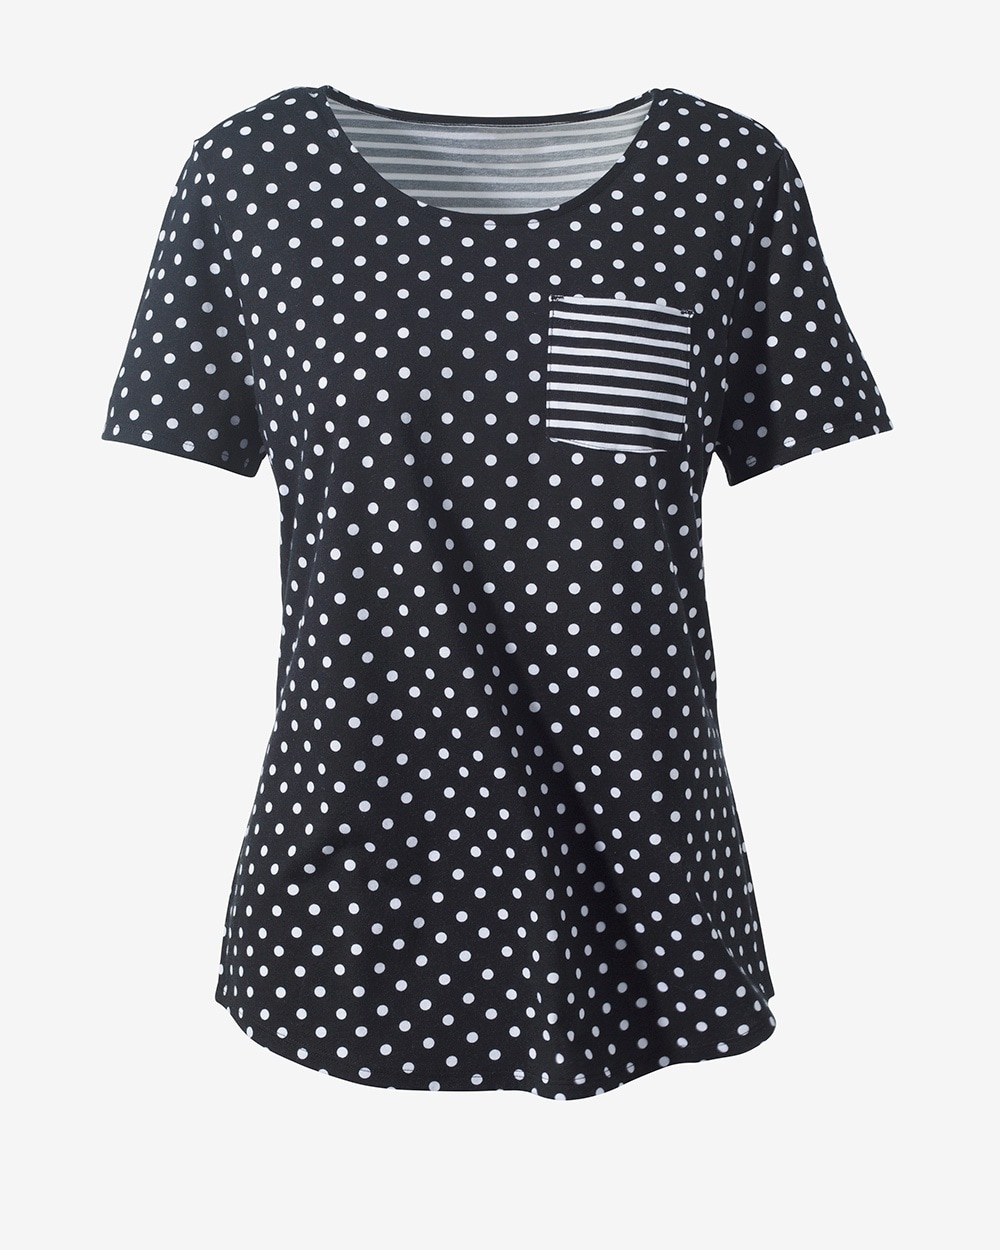 Dots and Stripes Pocket Tee